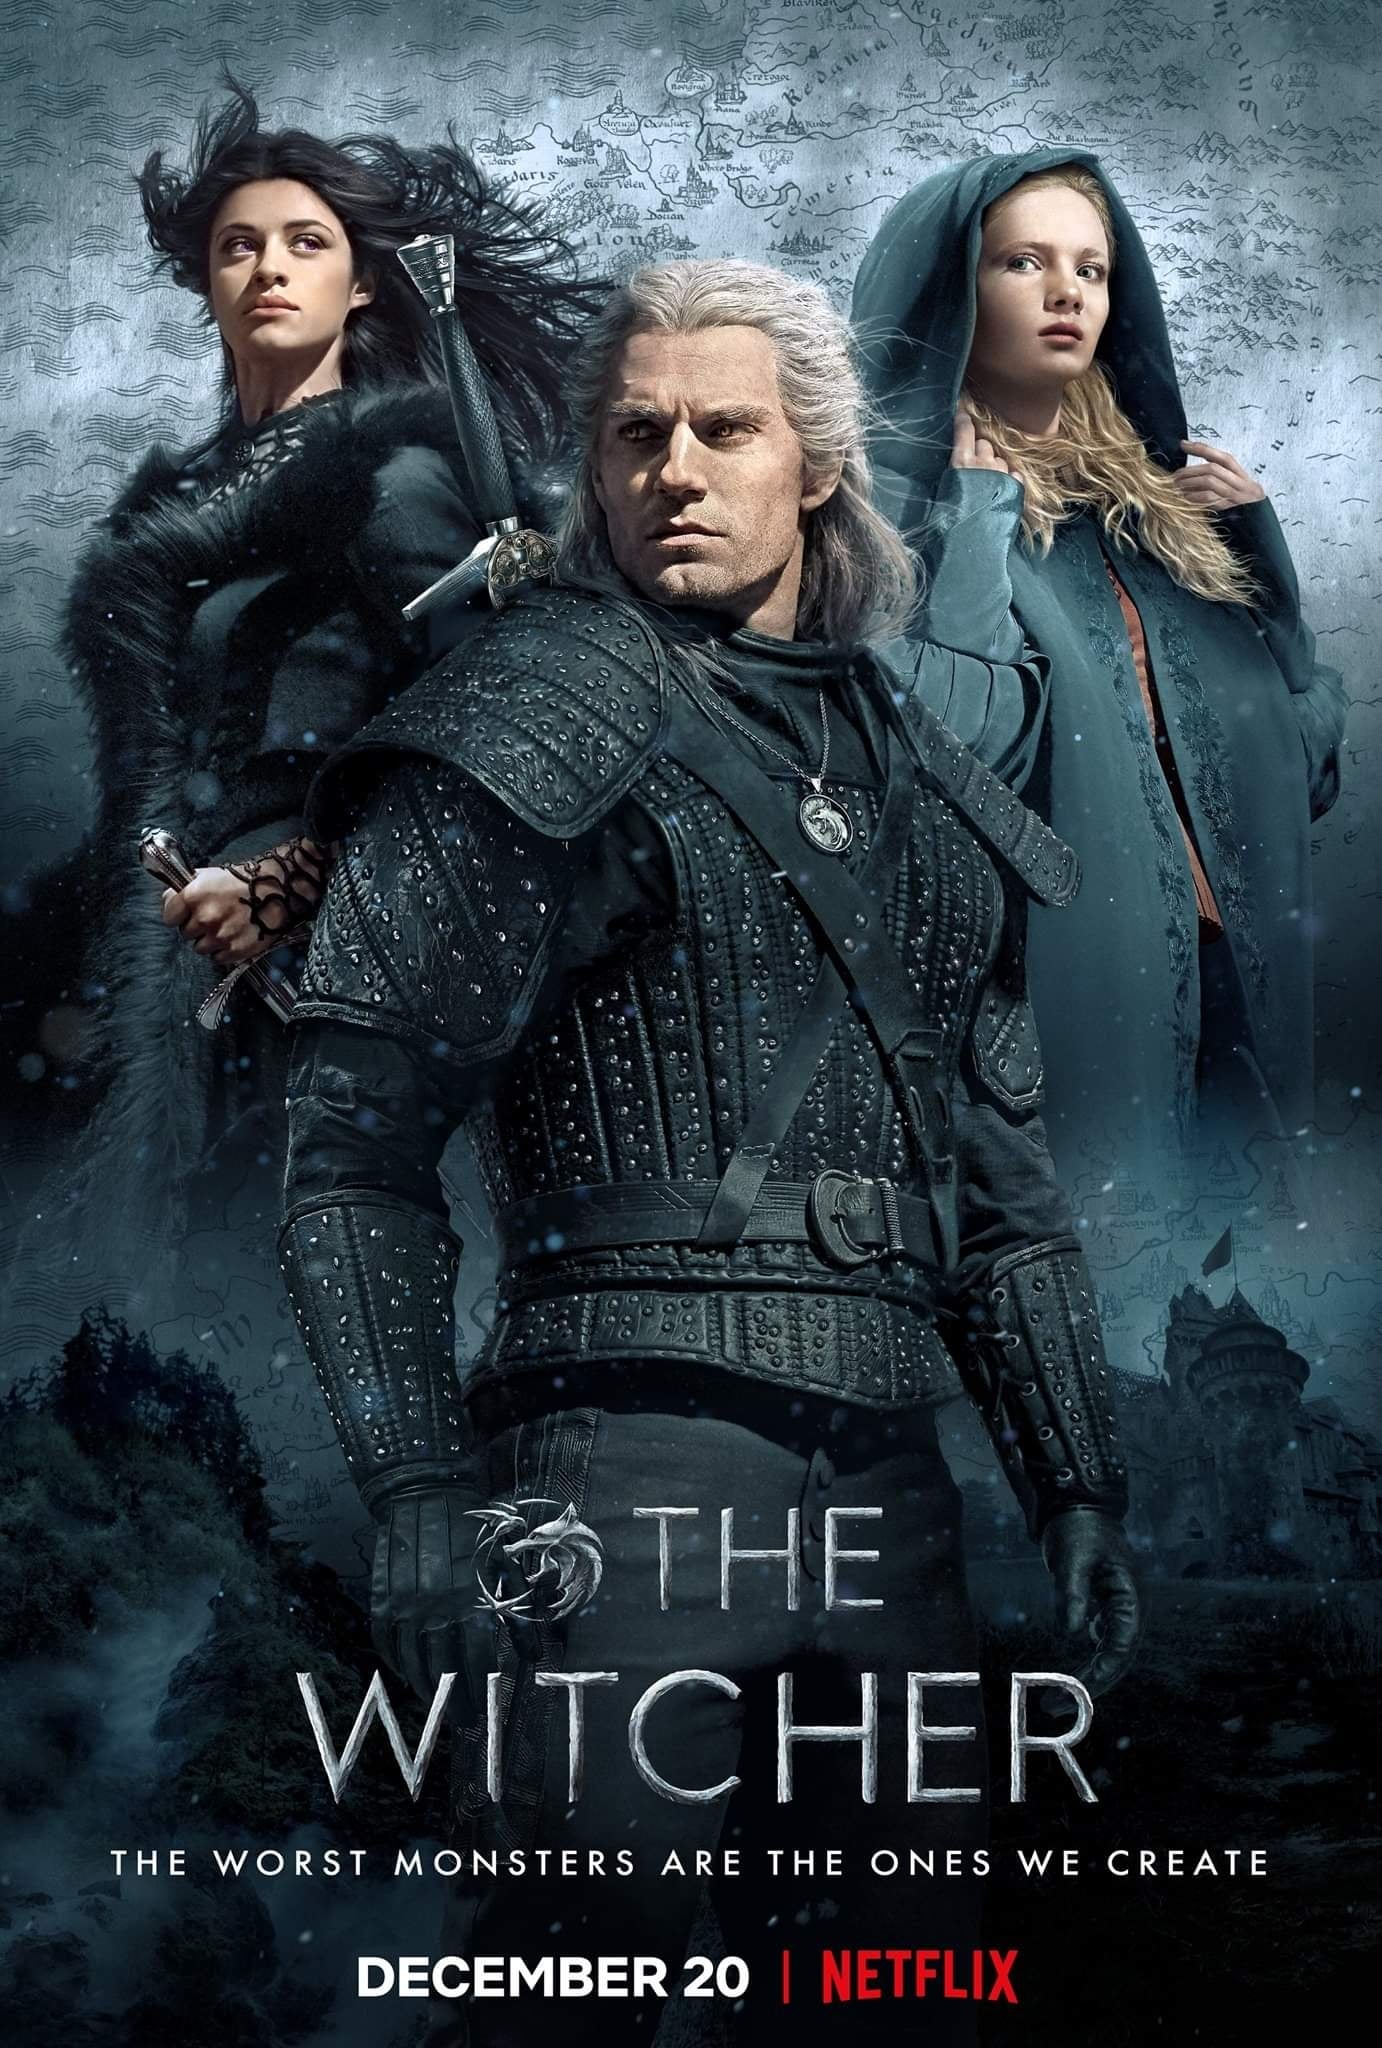 Protected: The Witcher 2019 S01 Hindi Dual Audio NF Series 720p | 480p Webhd x264 Esubs 